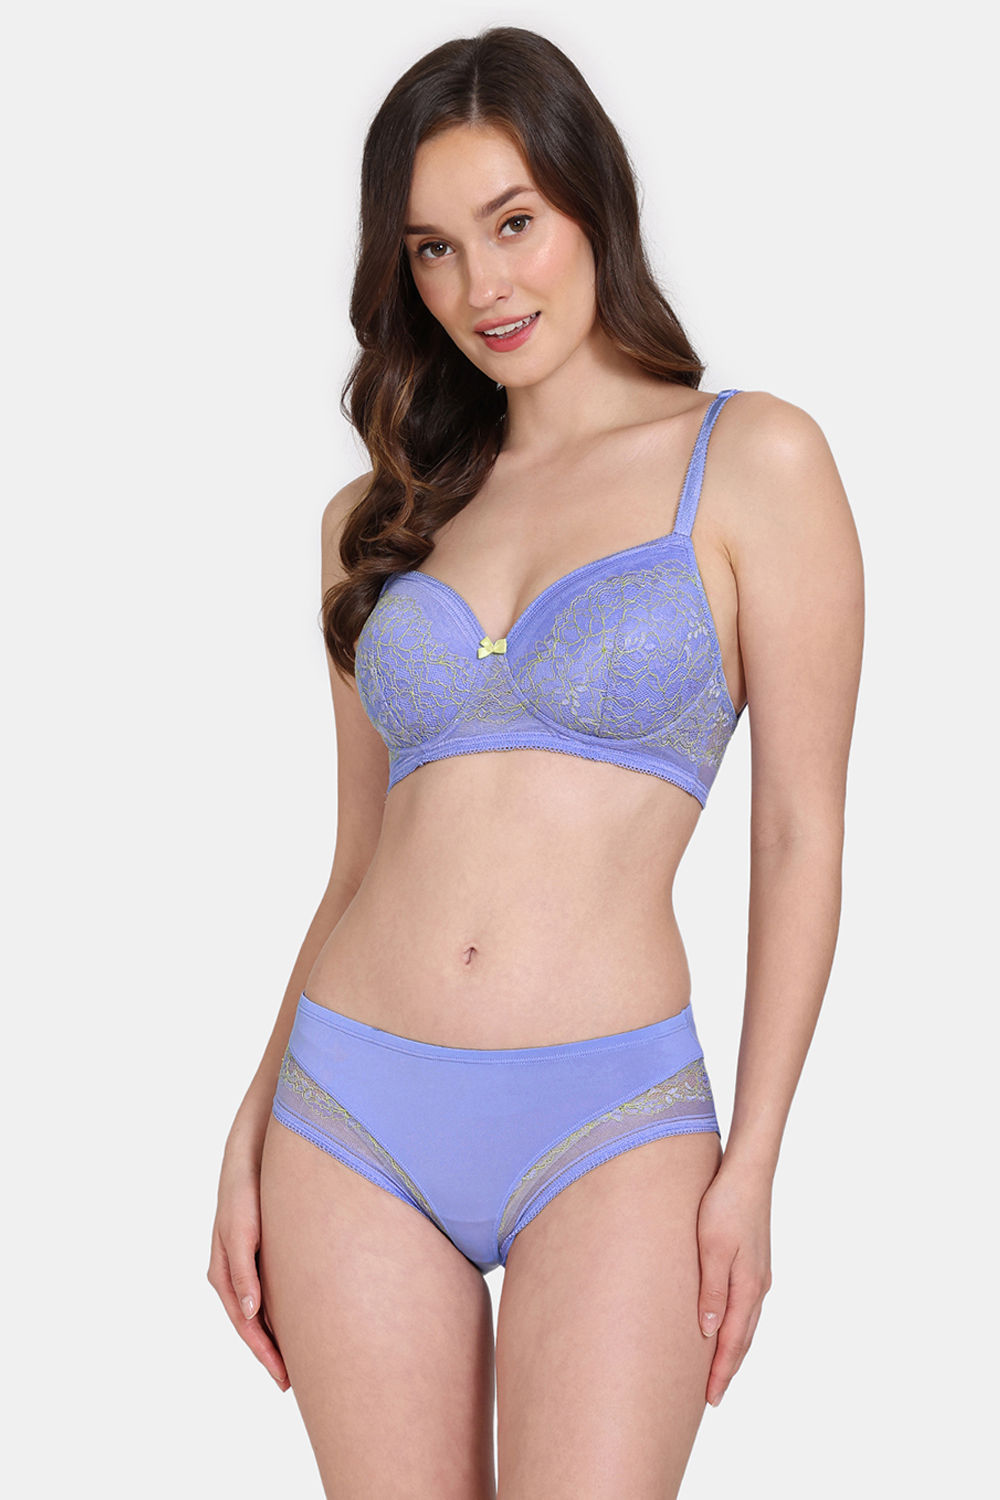 Small Bra - Buy Small Bras Online for Women in India